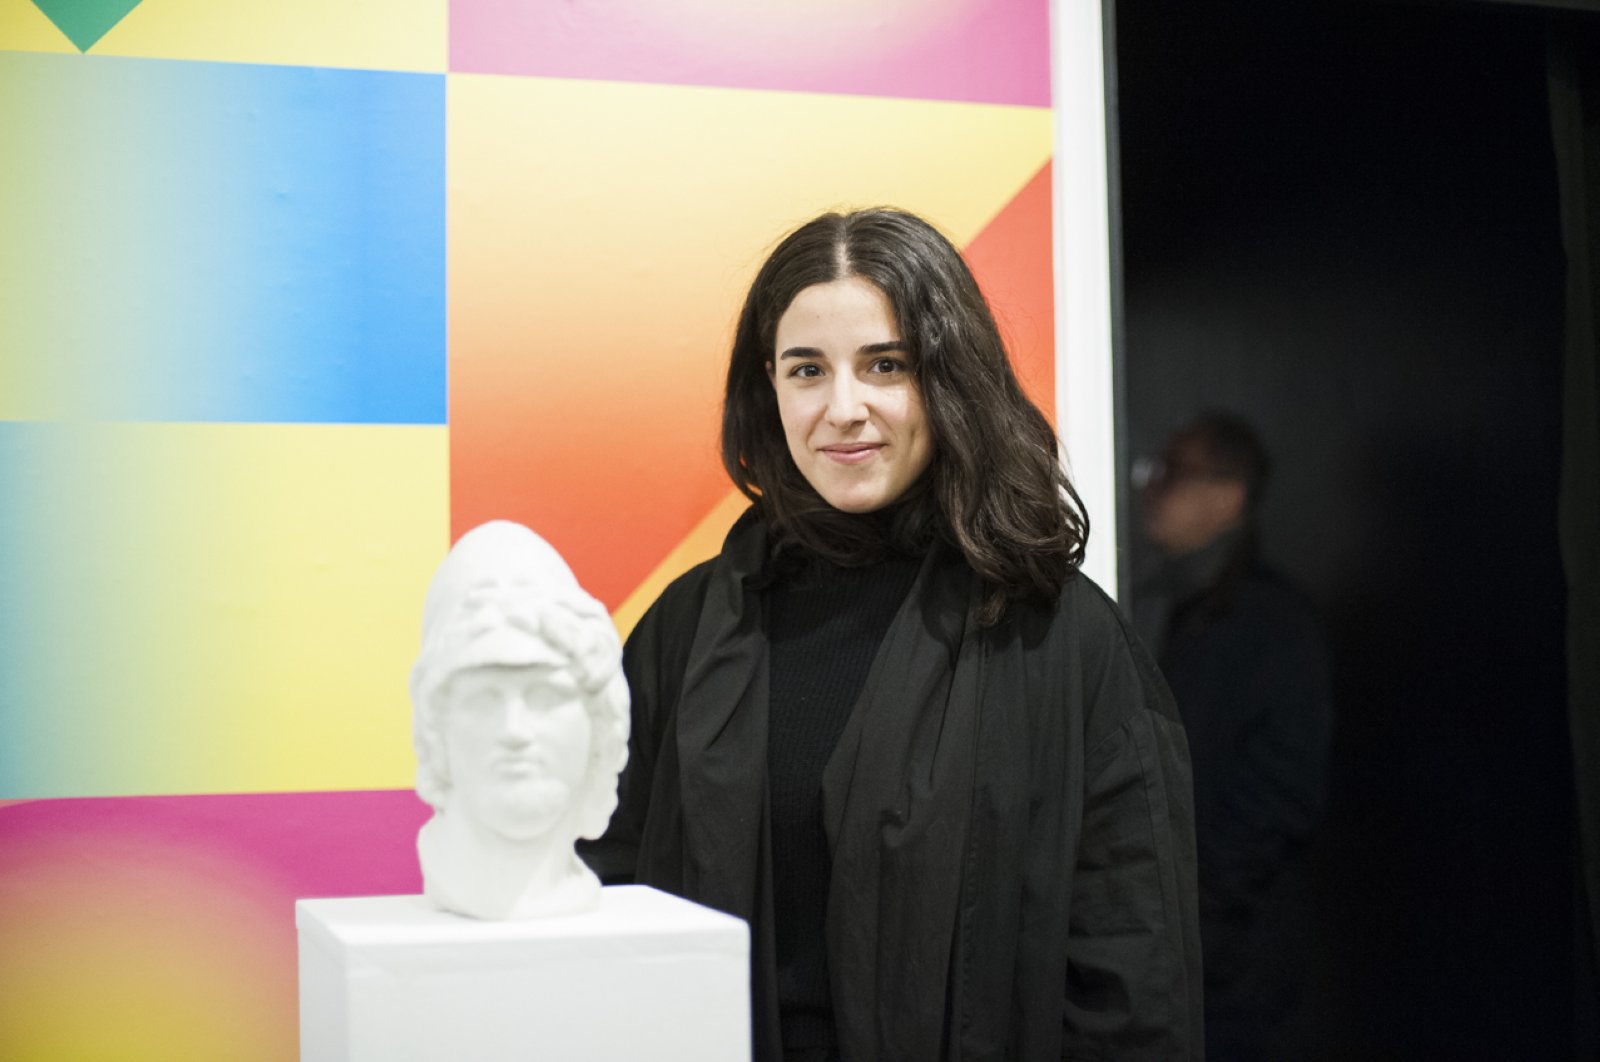 Yağmur Uyanık poses with a 3D printed sandstone sculpture, "Selfmaking: Layers of Becoming With." (Courtesy of British Council)